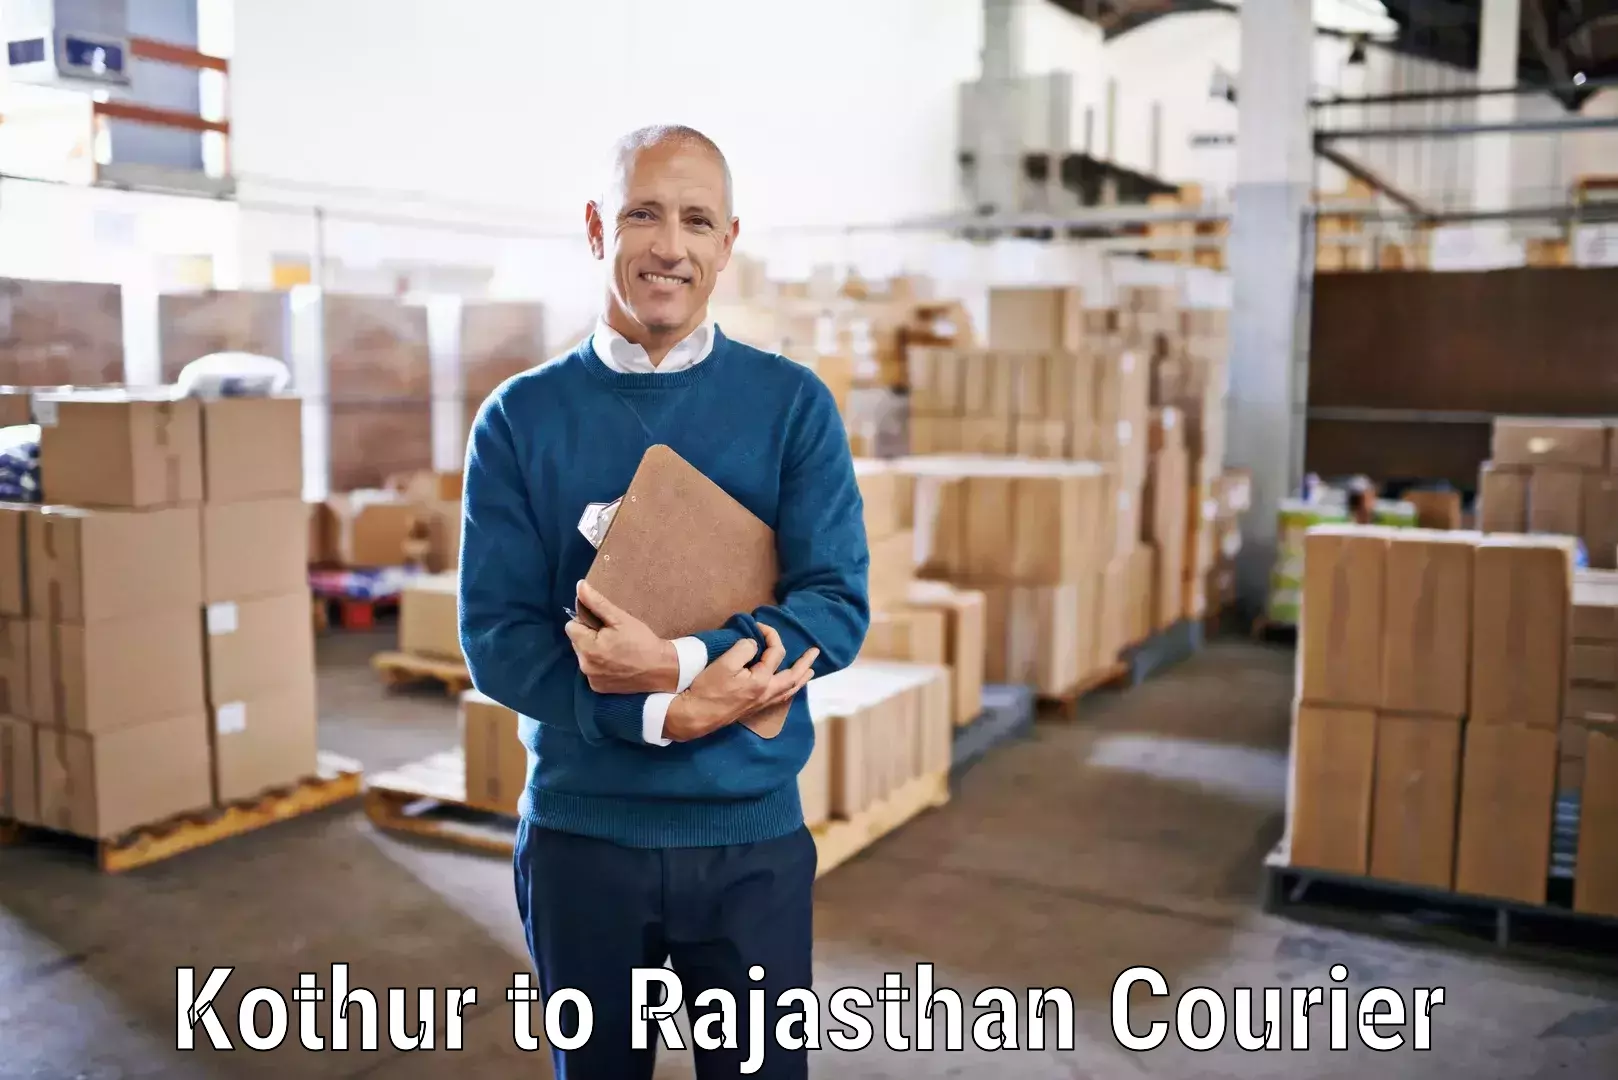 Customer-focused courier Kothur to Rajasthan